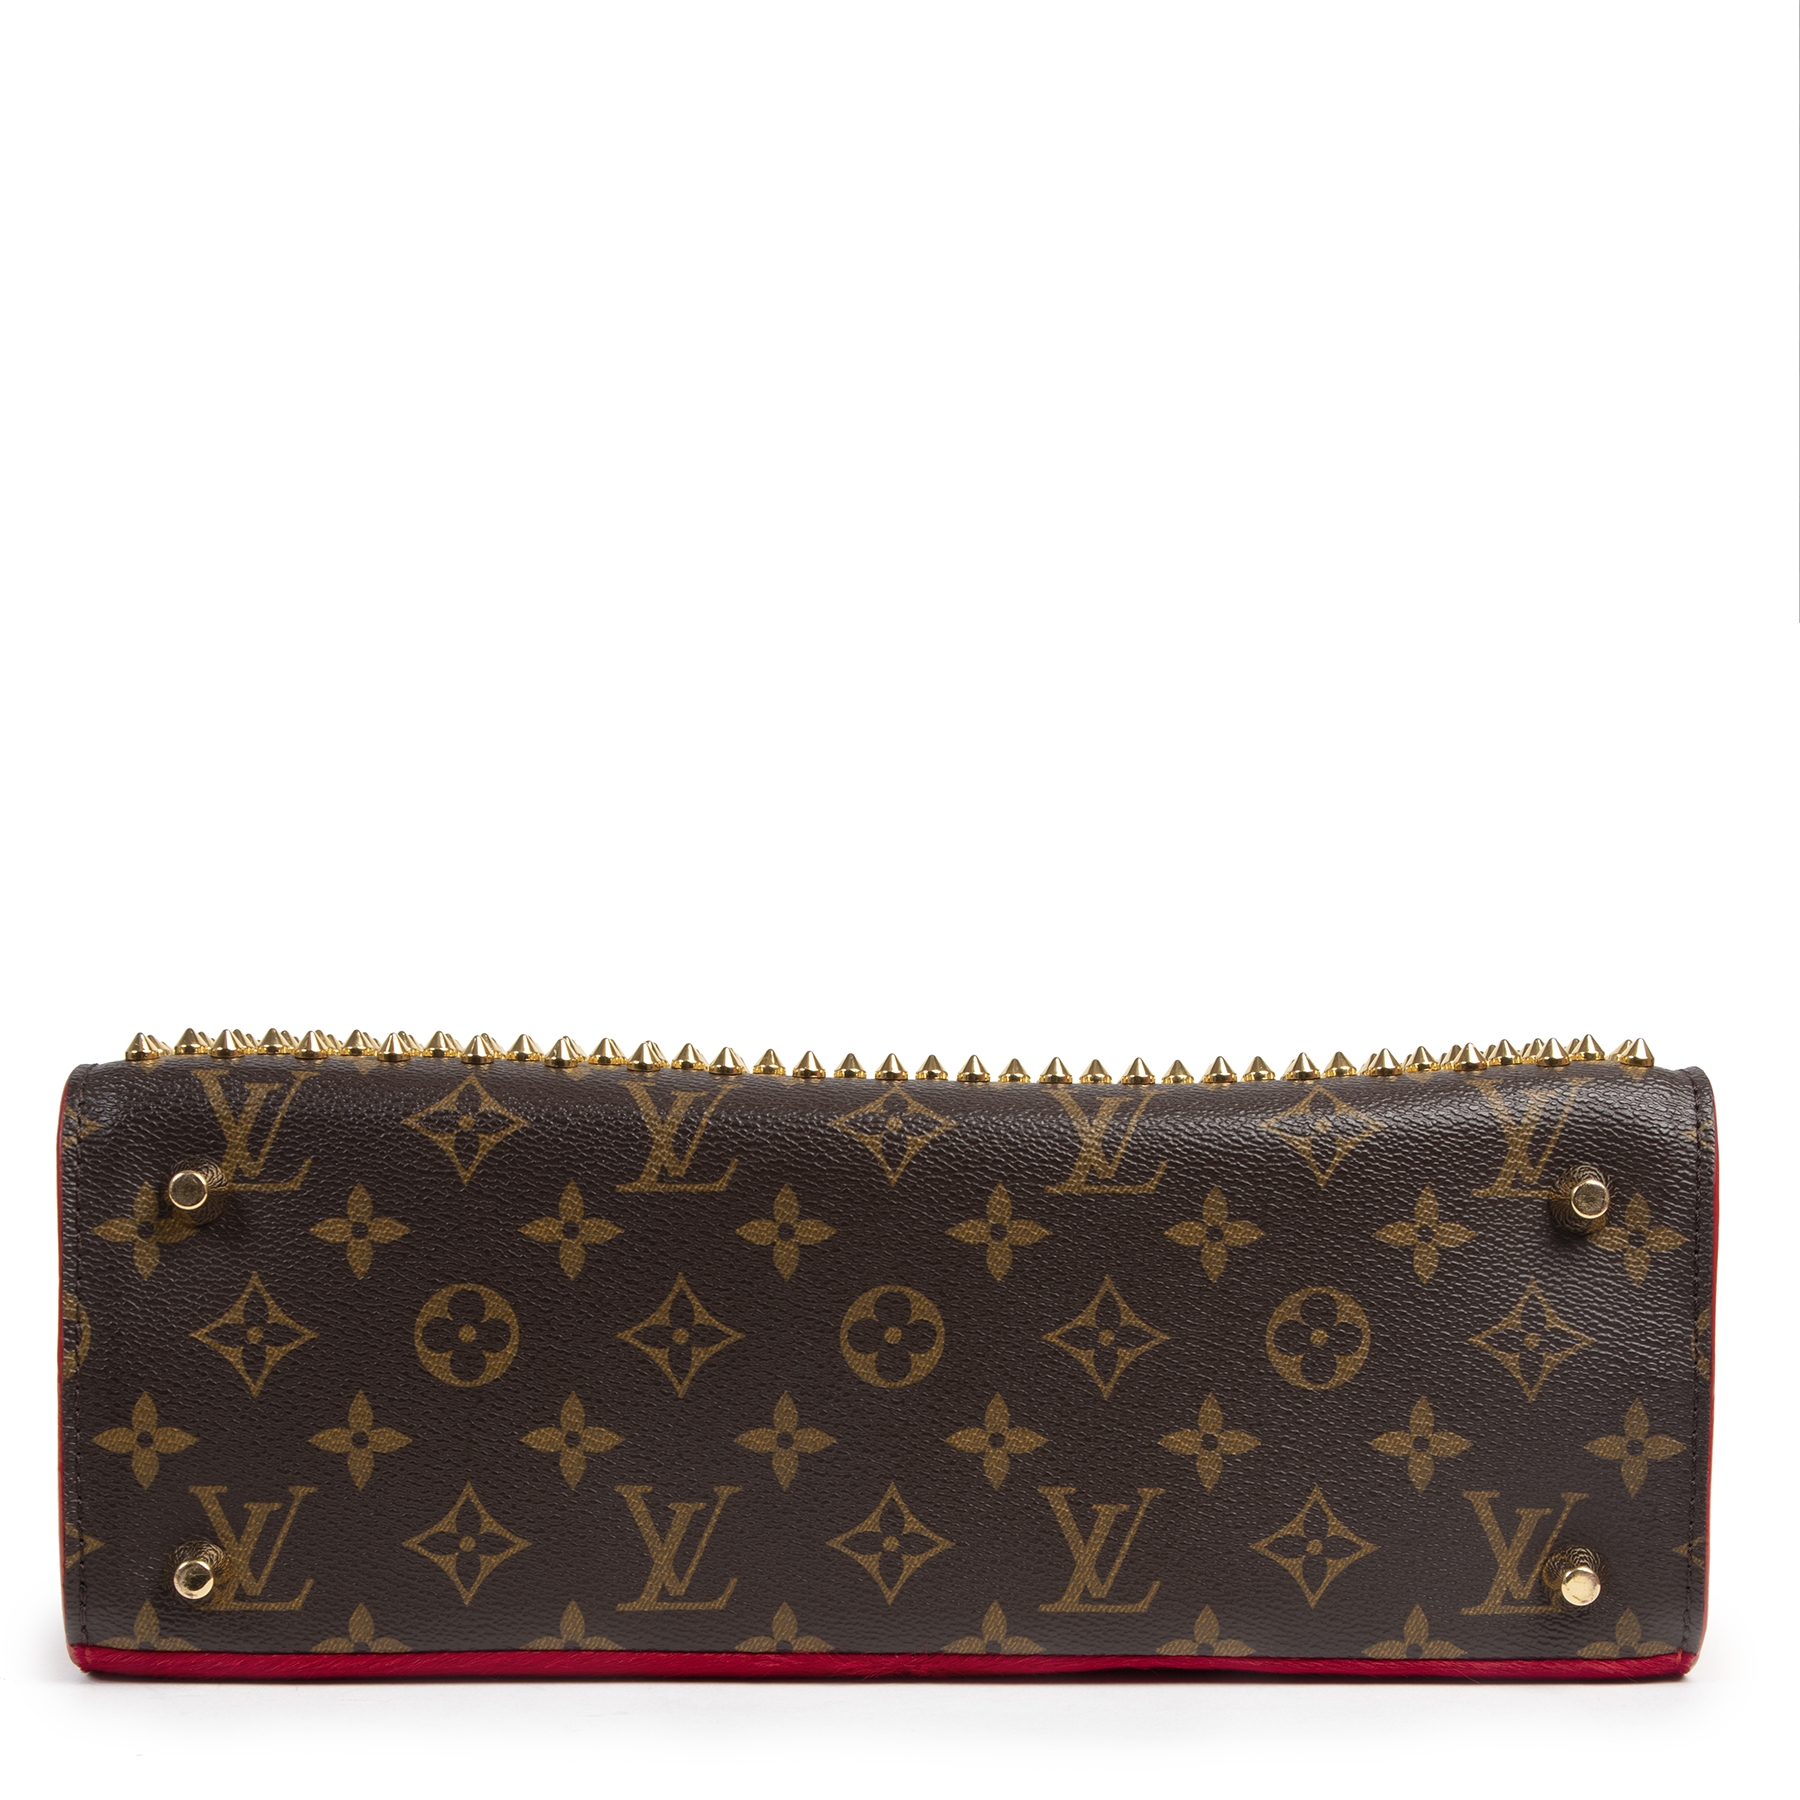 Sold at Auction: LOUIS VUITTON X CHRISTIAN LOUBOUTIN exklusive